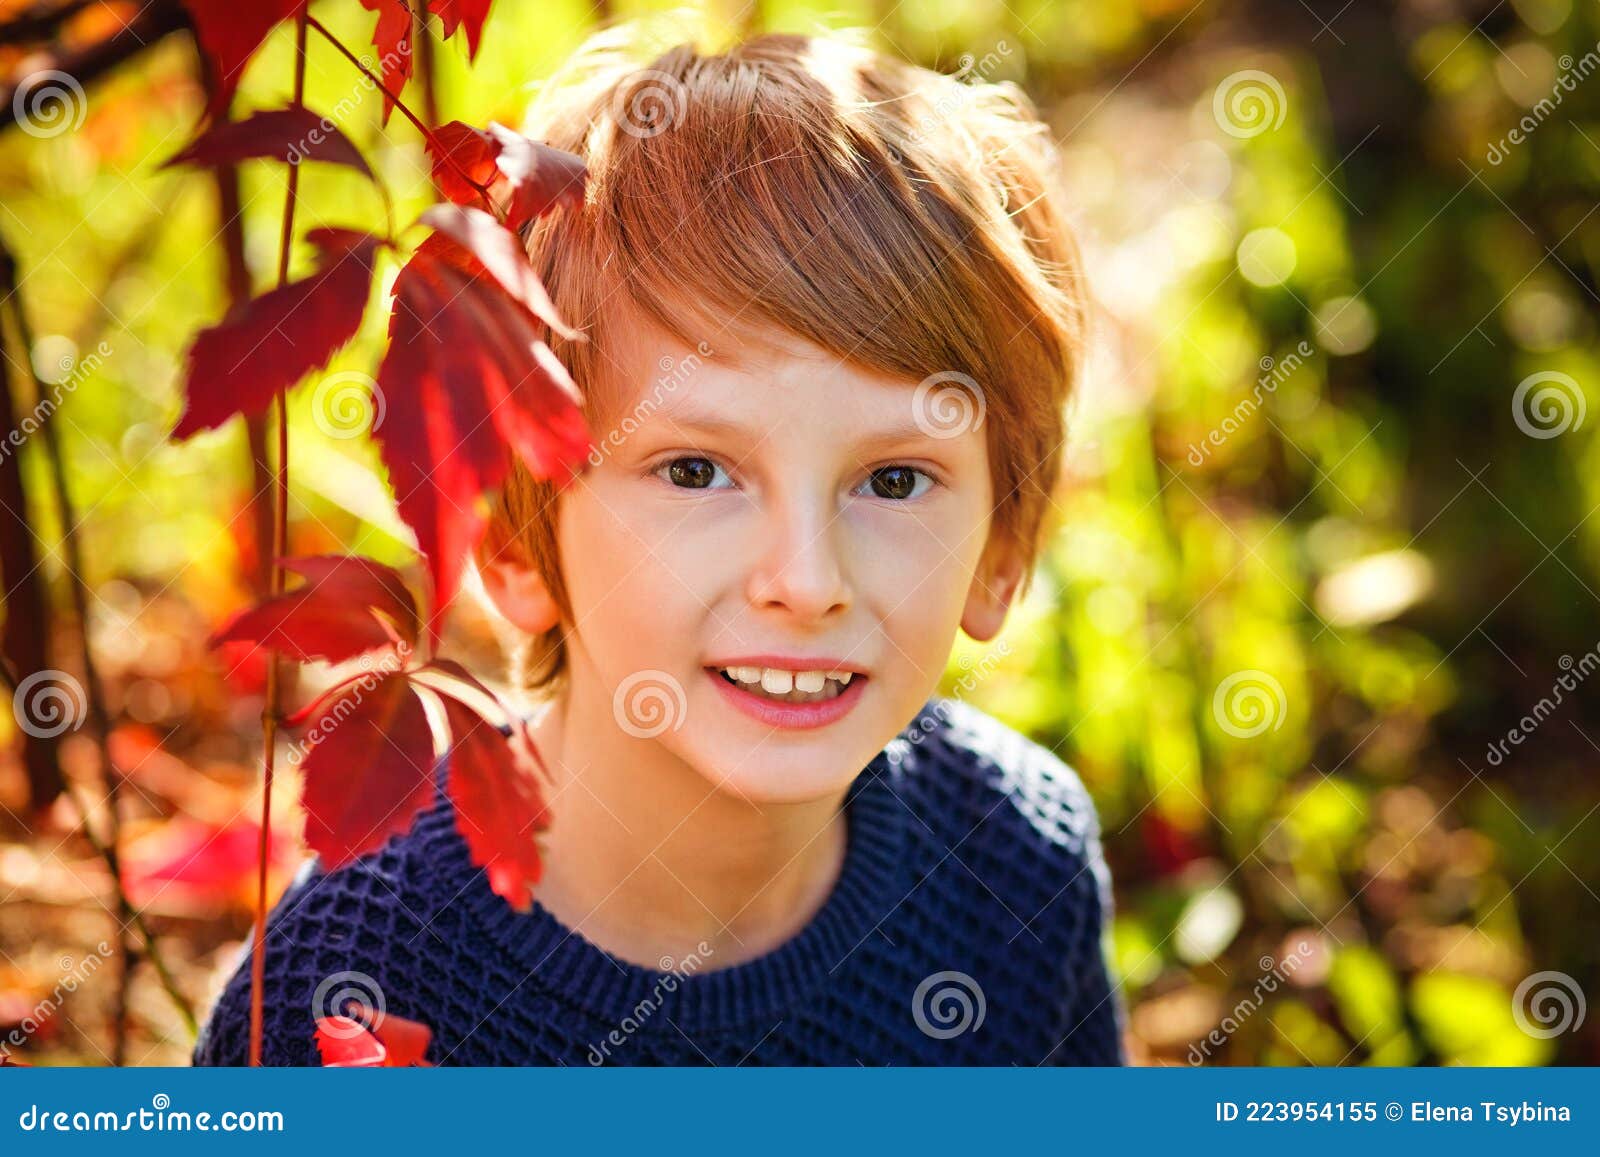 Red-haired boy with blonde highlights - wide 5